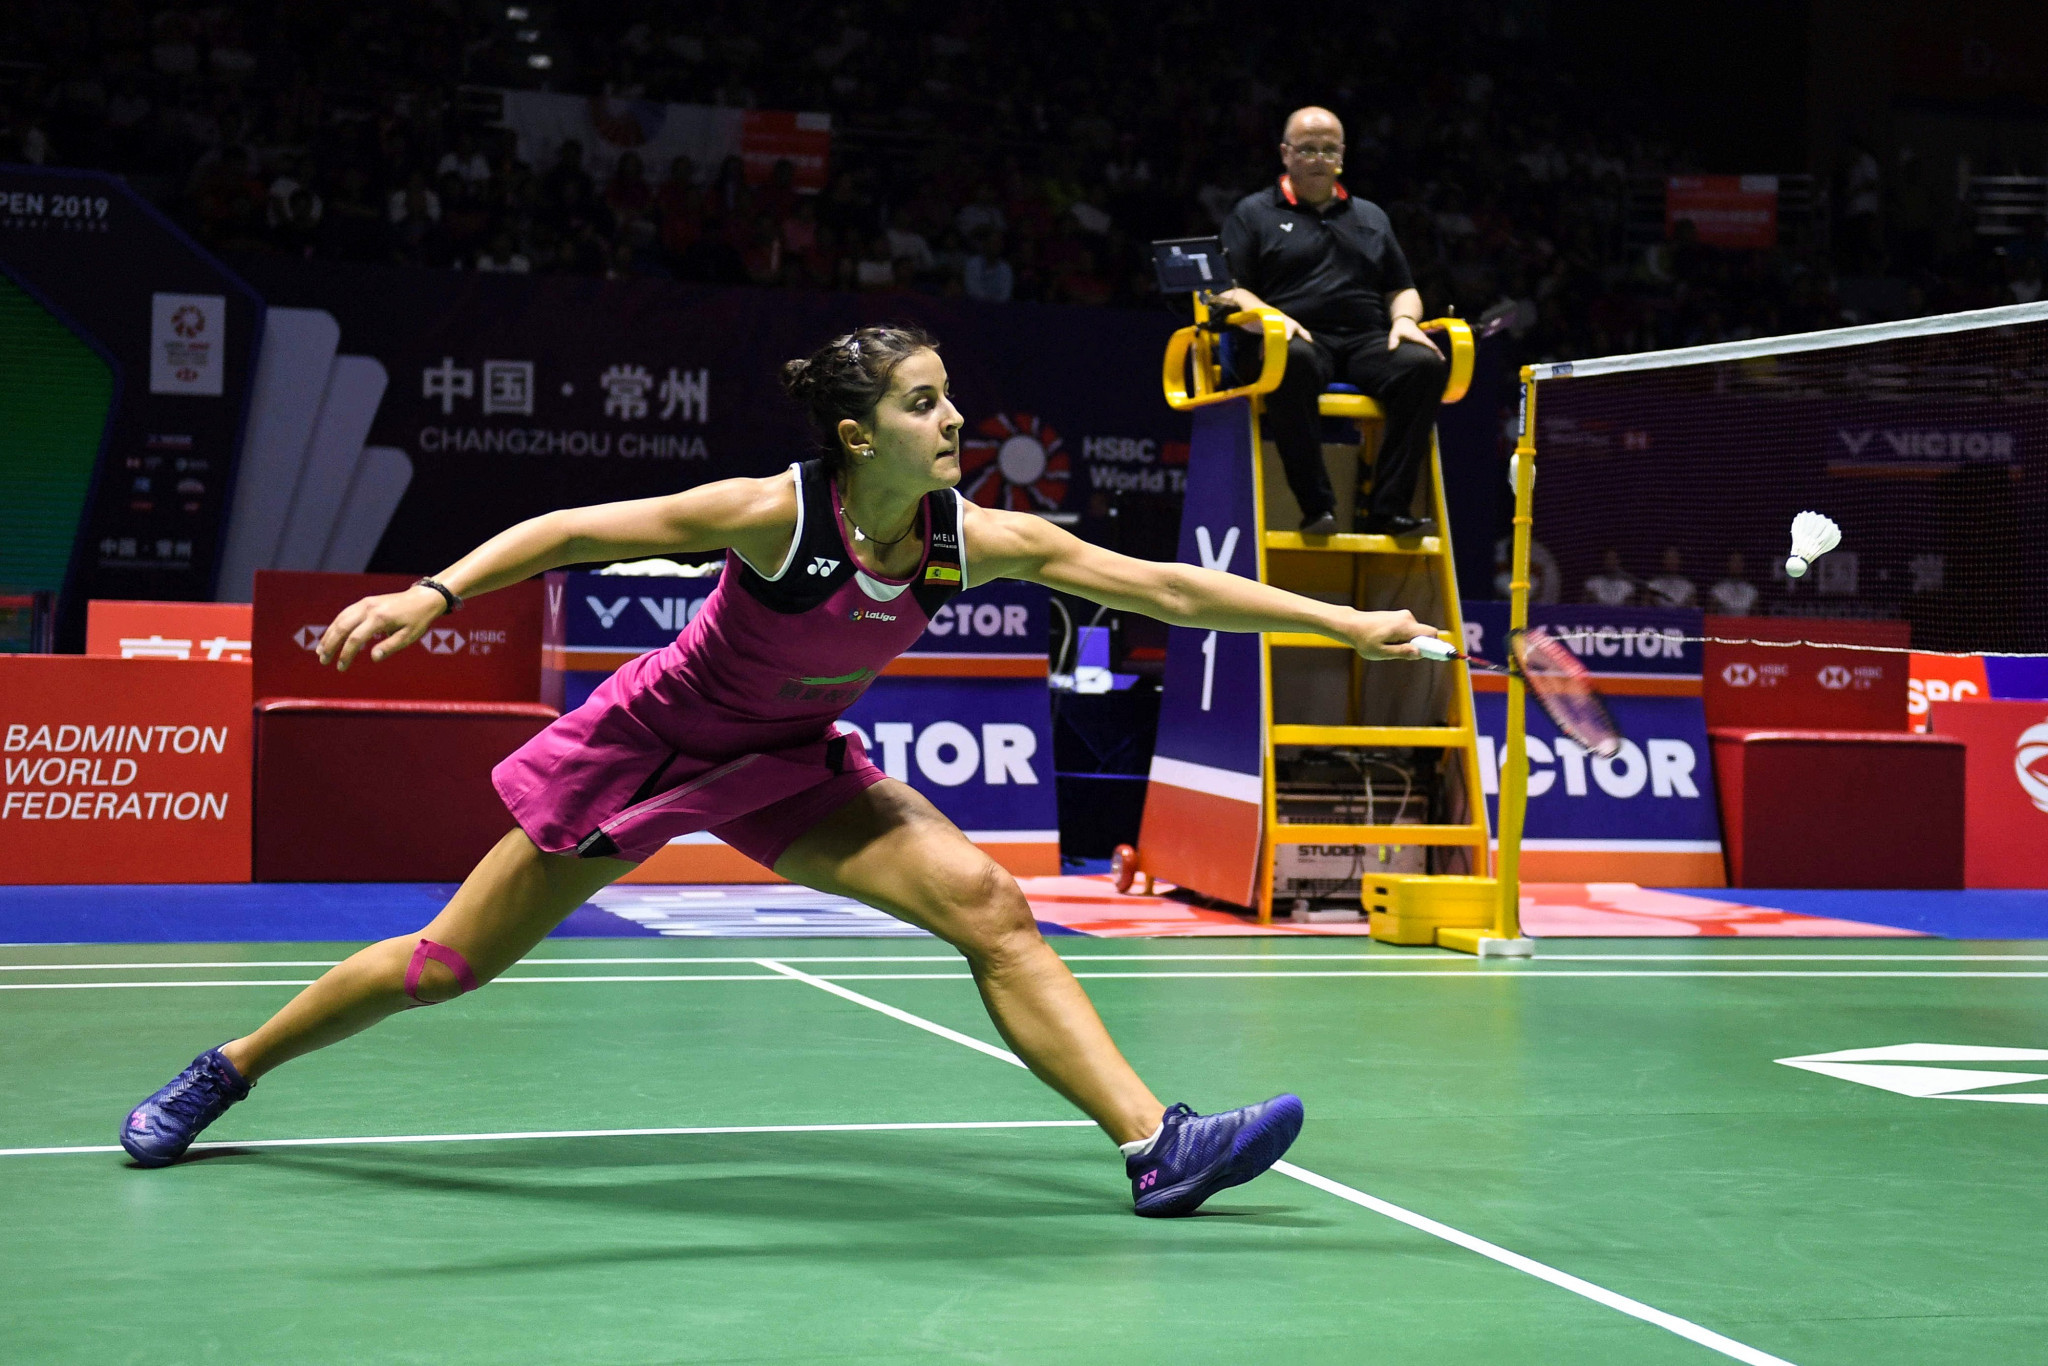 Olympic champion Carolina Marín is through to the quarter-finals of the Syed Modi International Badminton Championships ©Getty Images